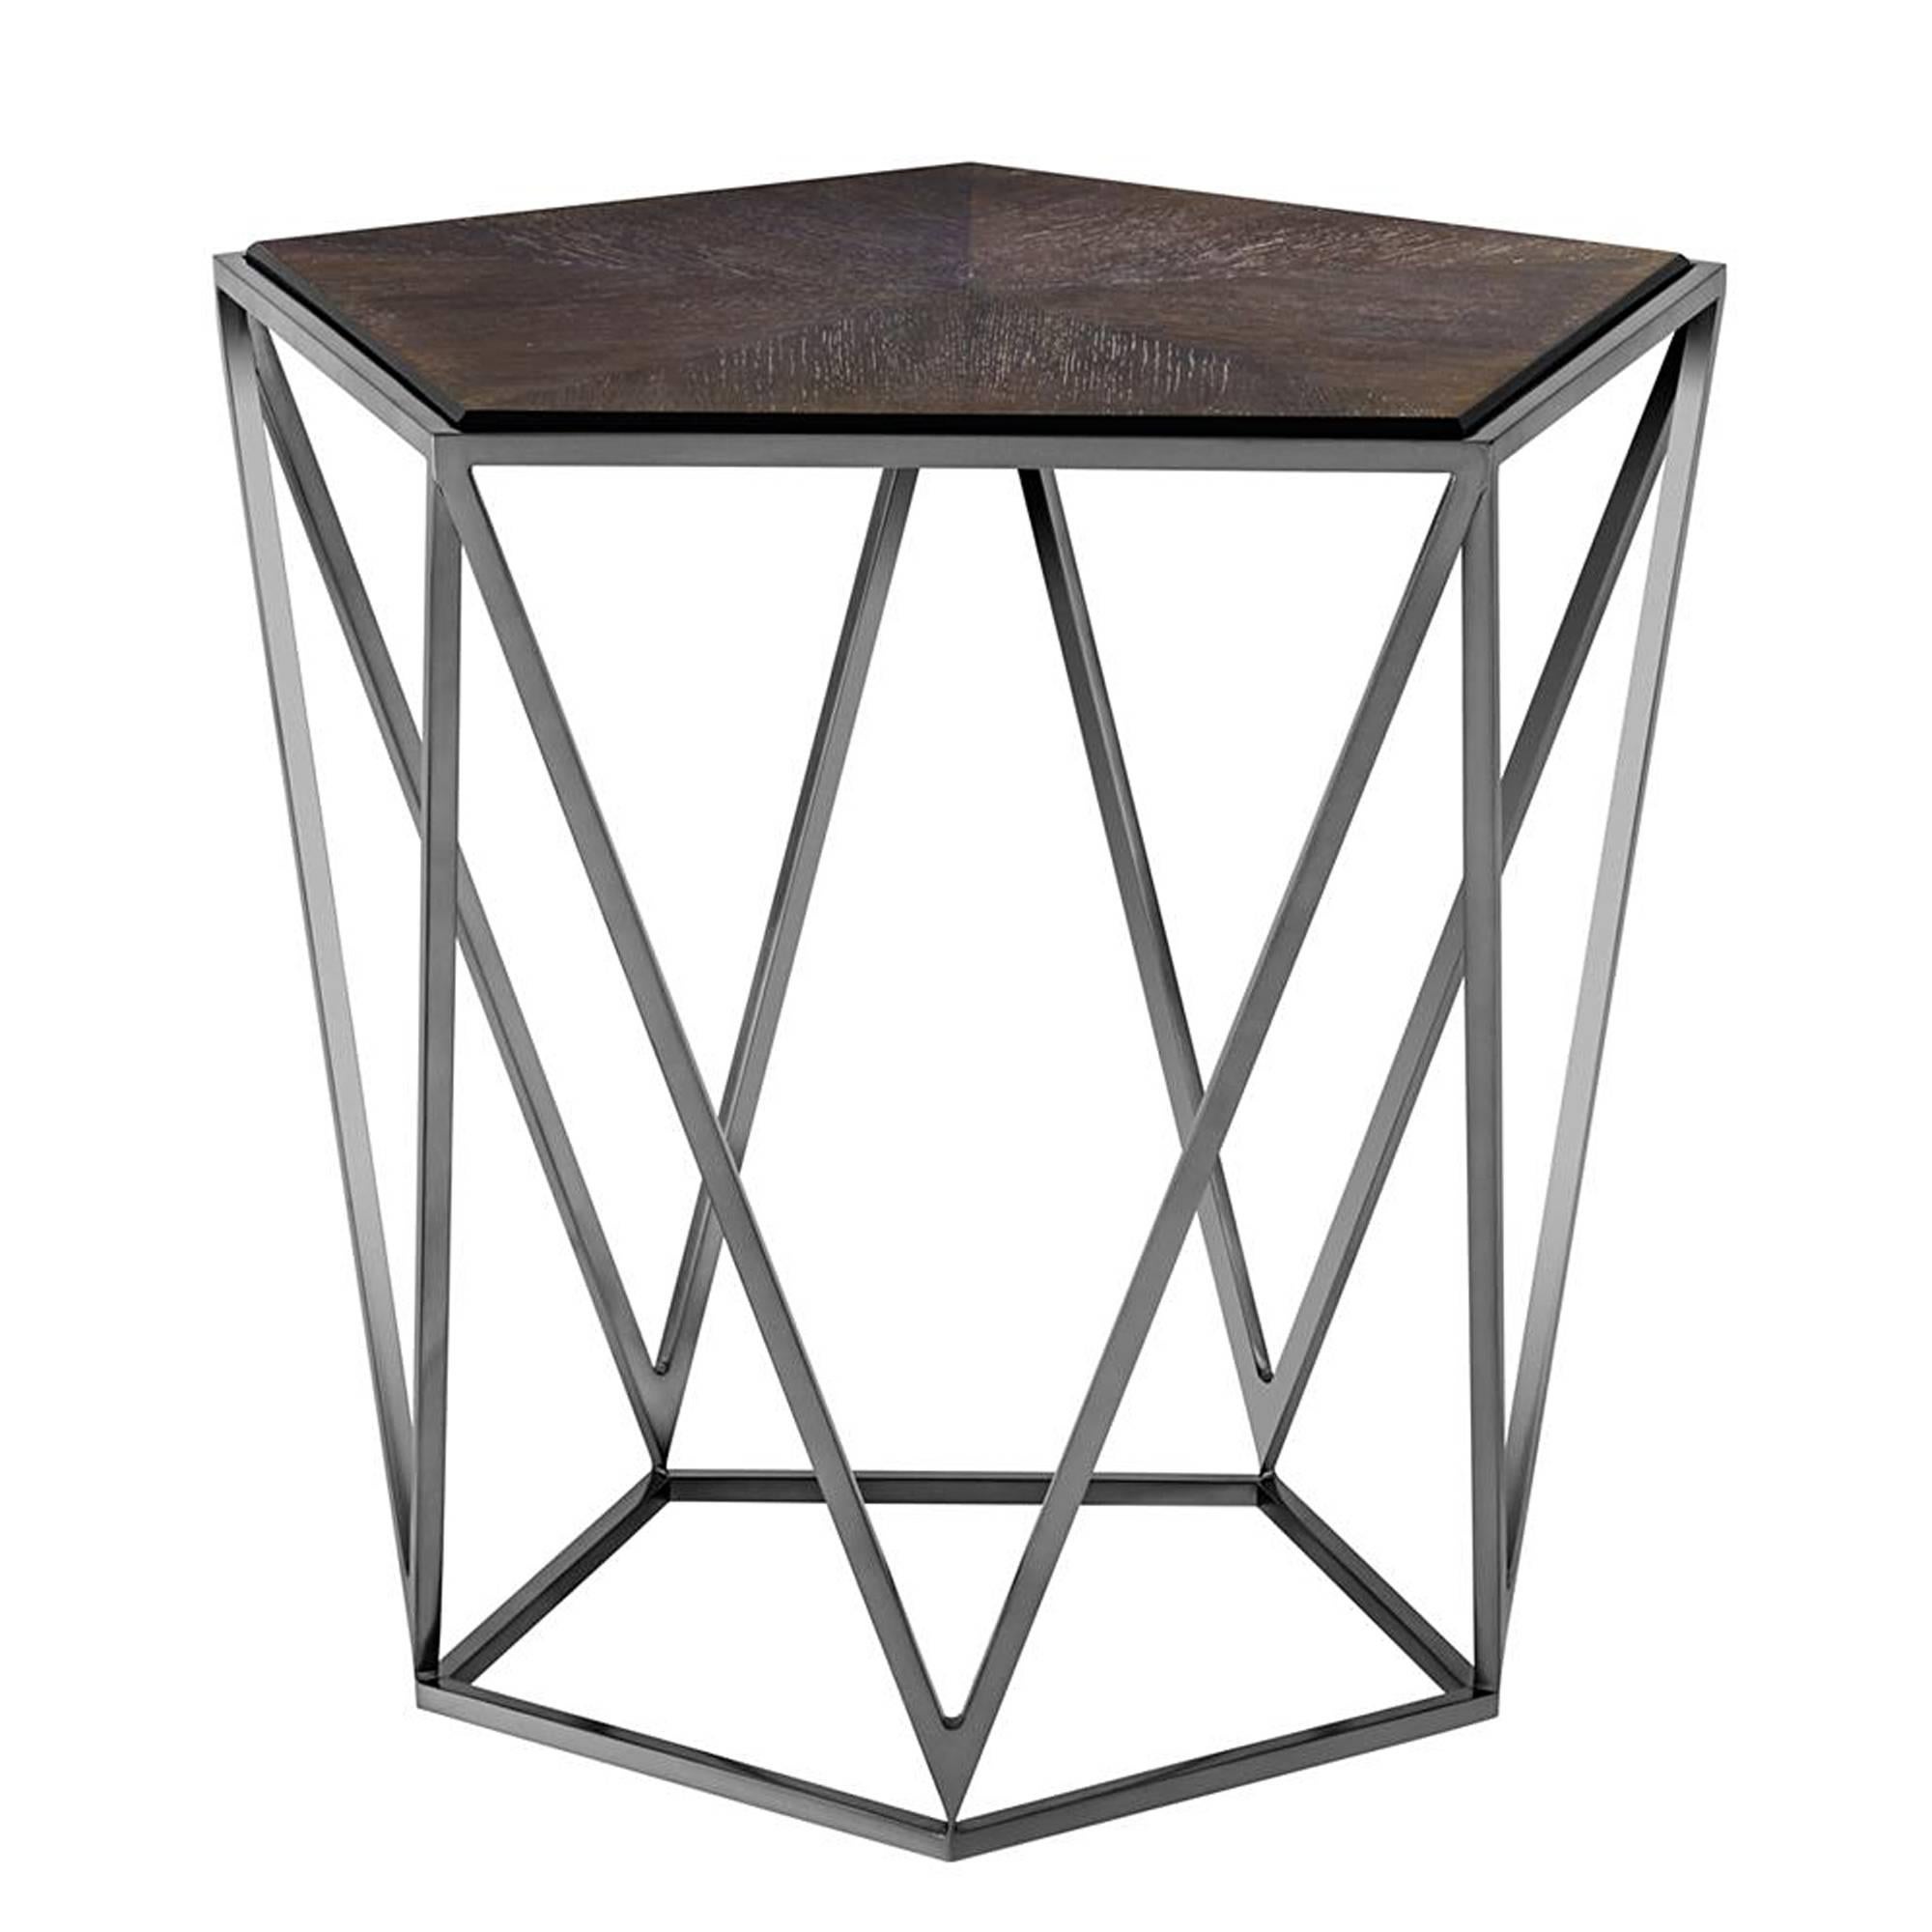 Side table Penta with charcoal oak veener top
on black nickel finish base. Original piece for living or
office. 